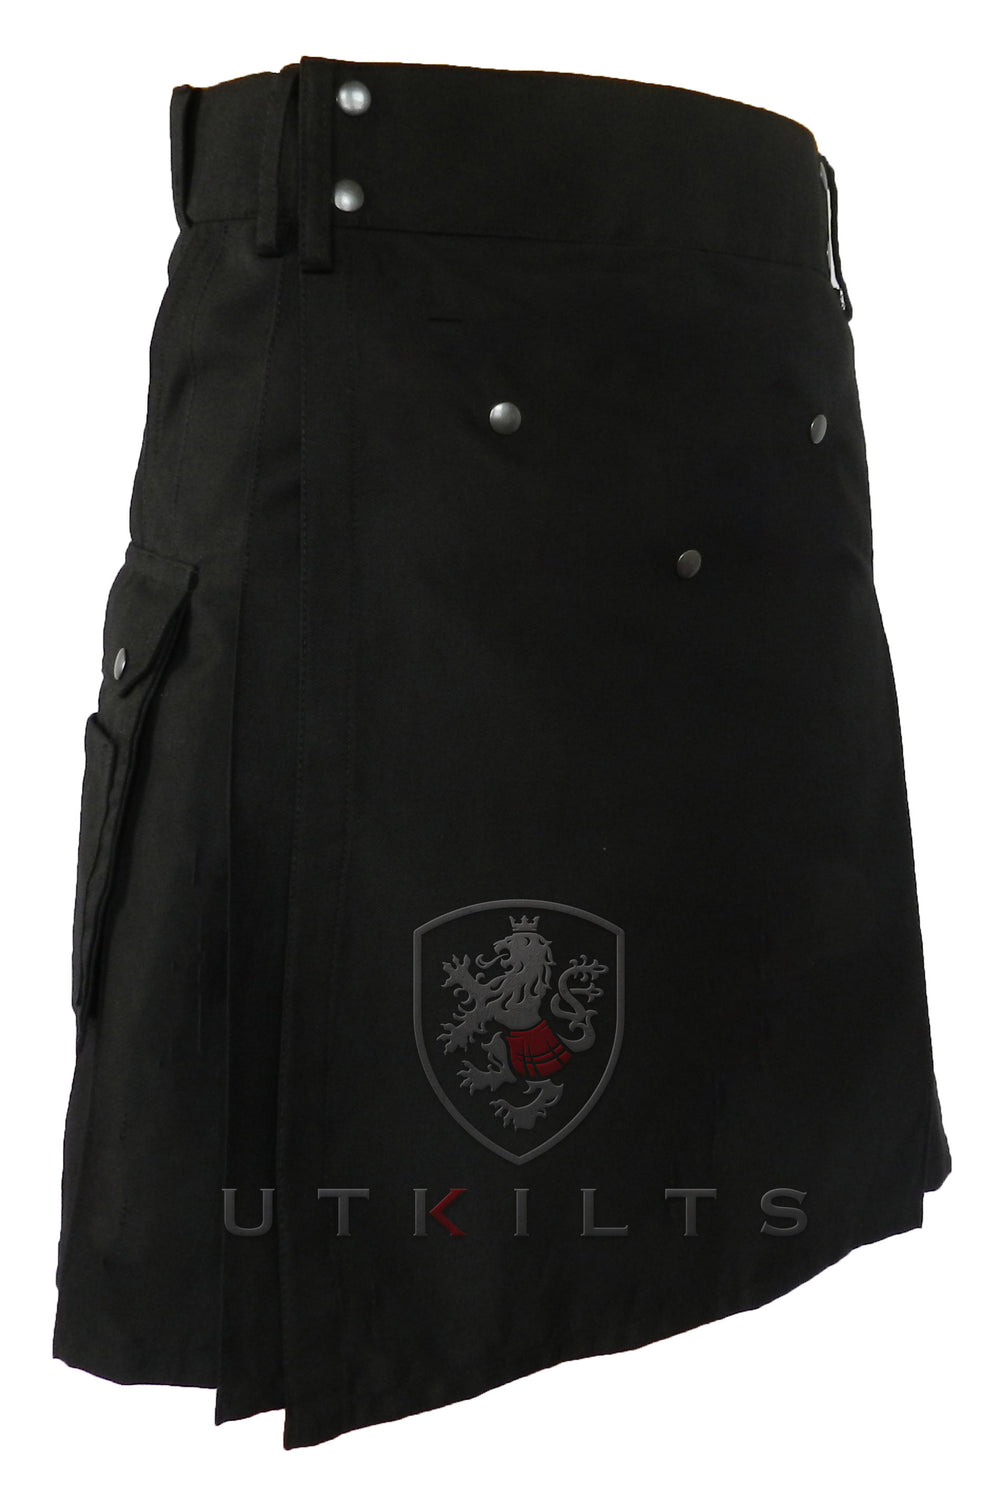 CLEARANCE! Black / Highlander gray Pleat Two Tone Kilts Ultimate - 41x23